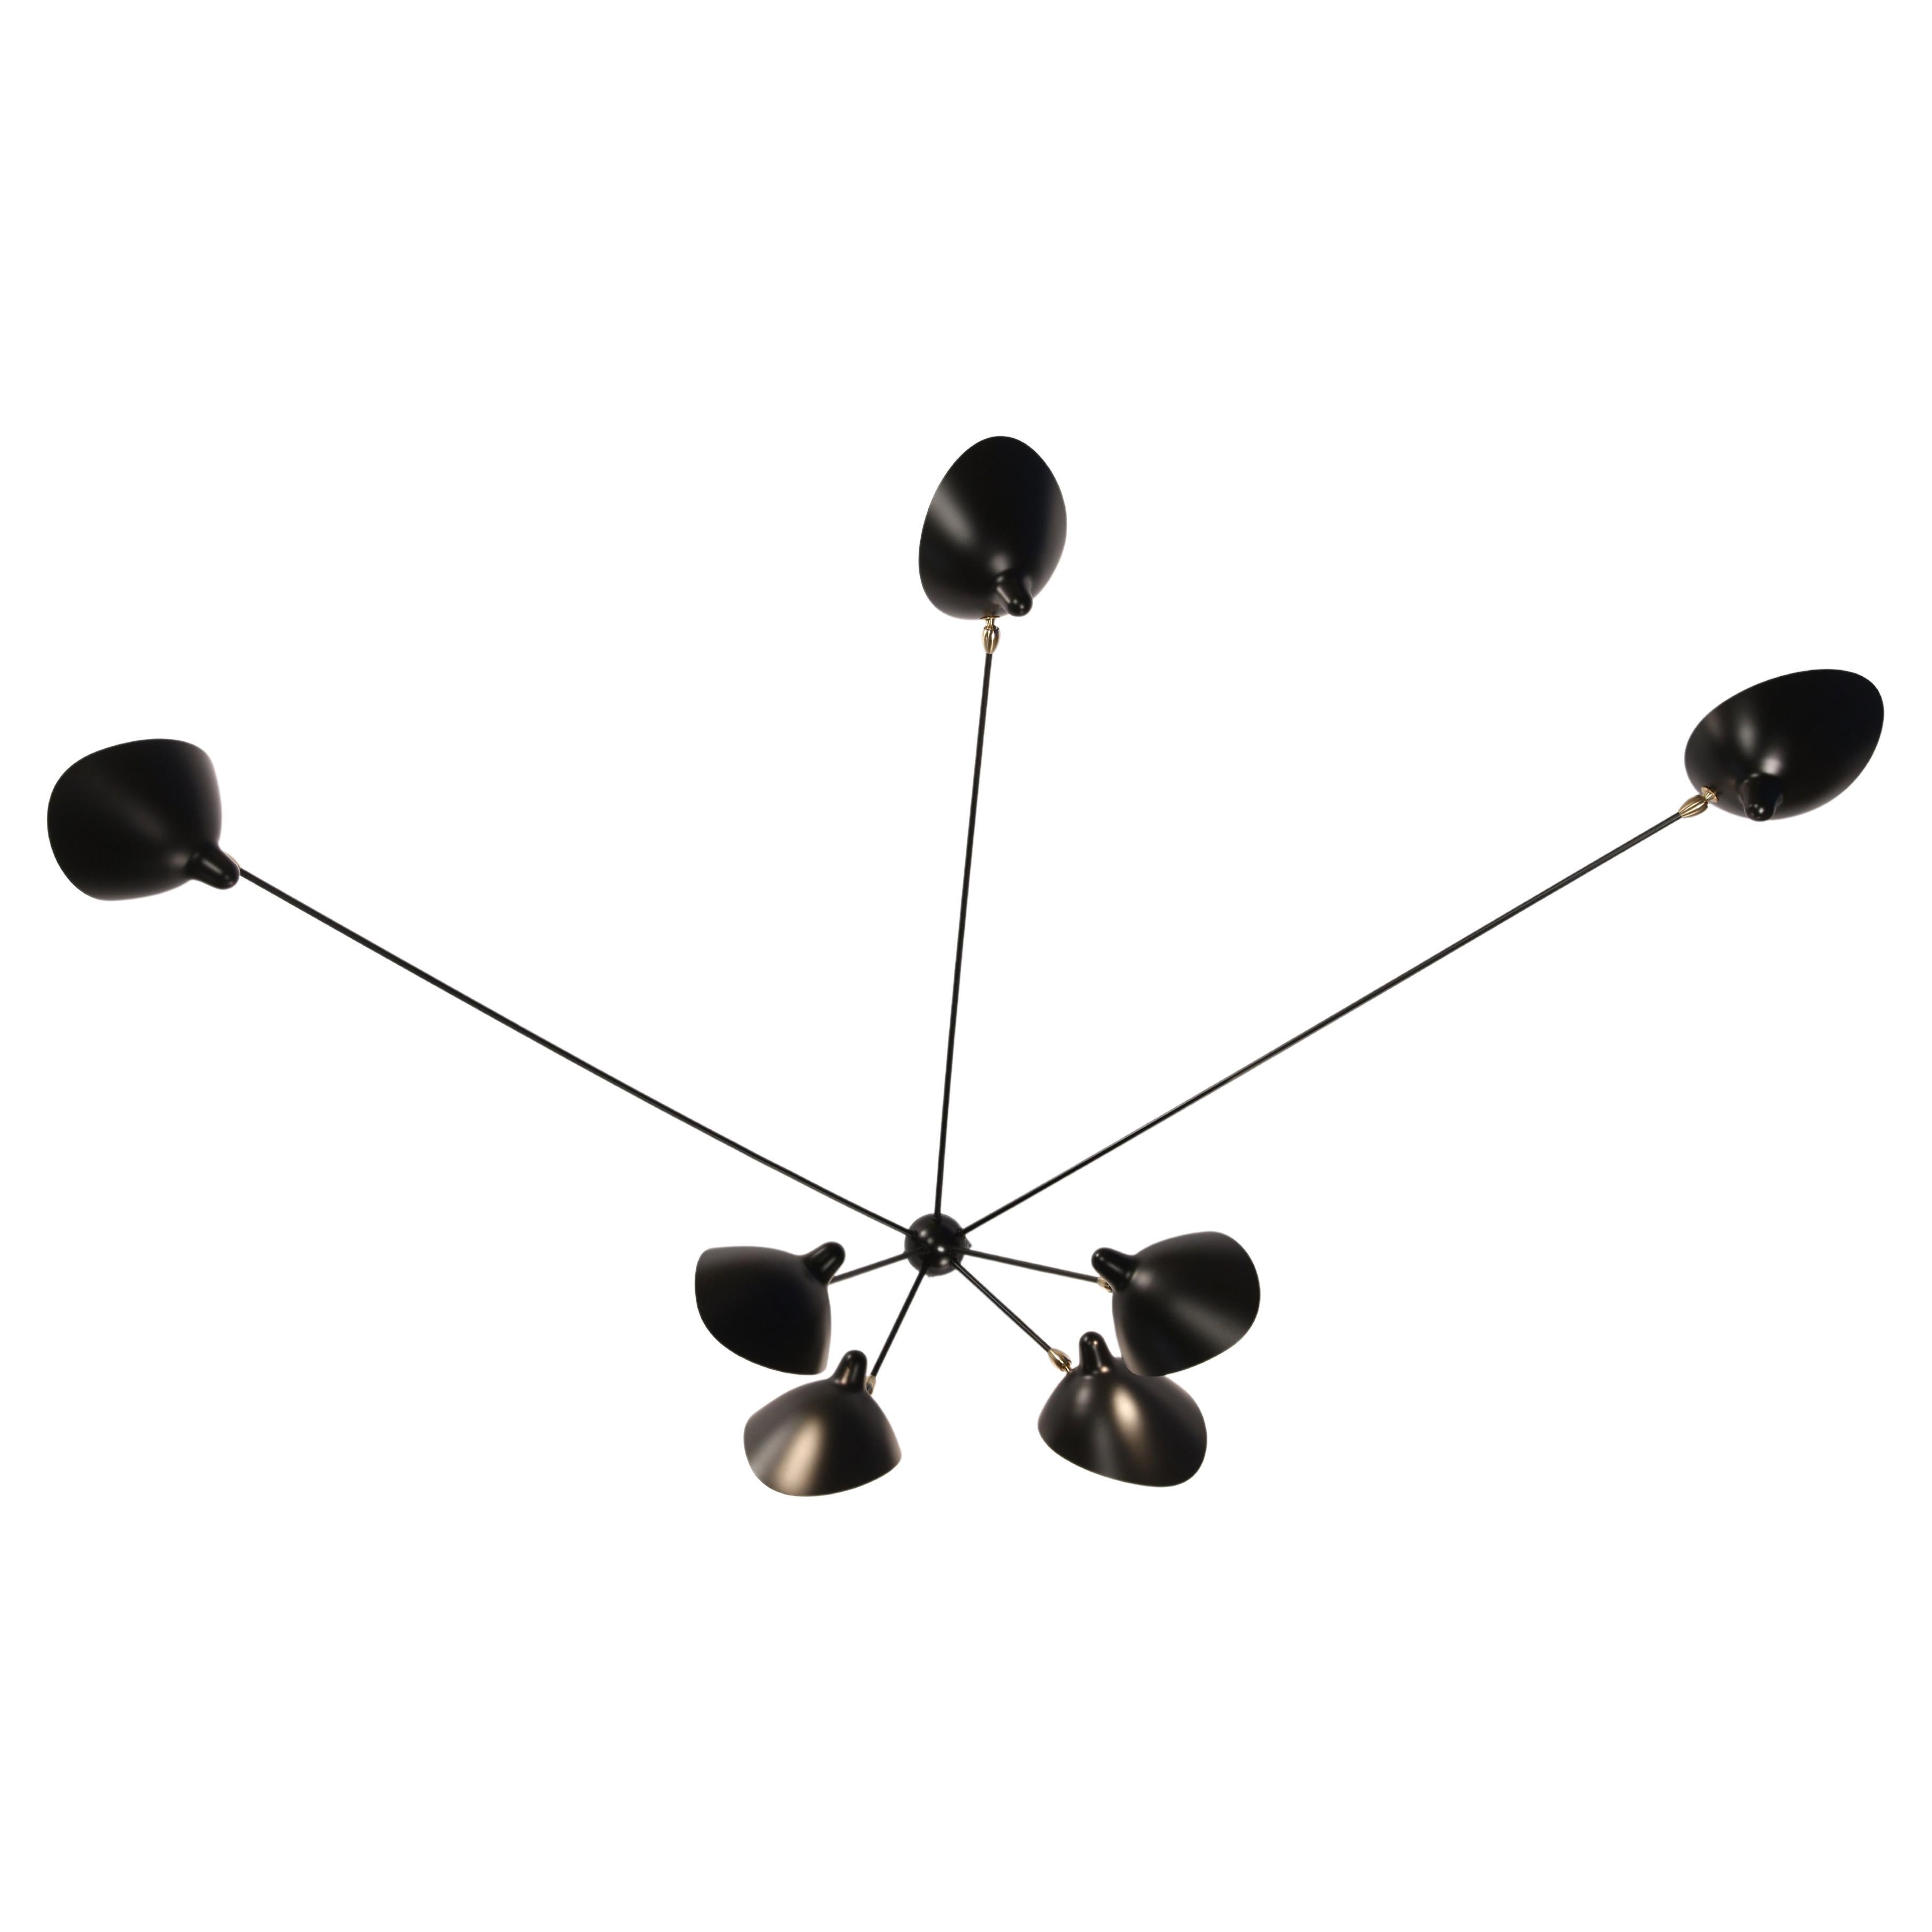 Sconce Serge Mouille Model "Applique Spider Seven Arms" in Black or White For Sale